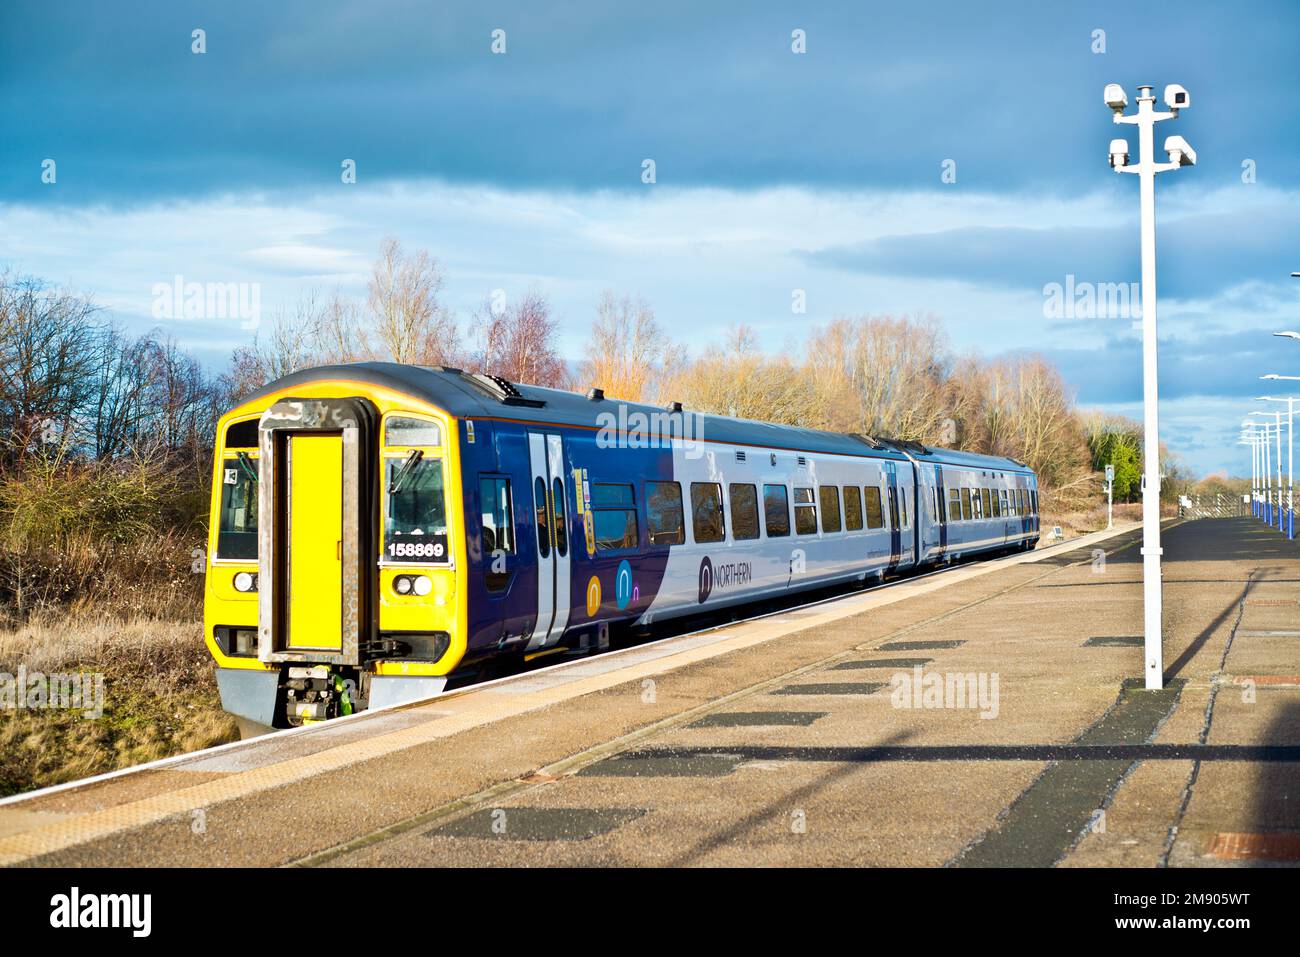 Class 158 Northern Rail Unit at Eaglescliffe Station, Stockton on Tees, Cleveland, England Stock Photo